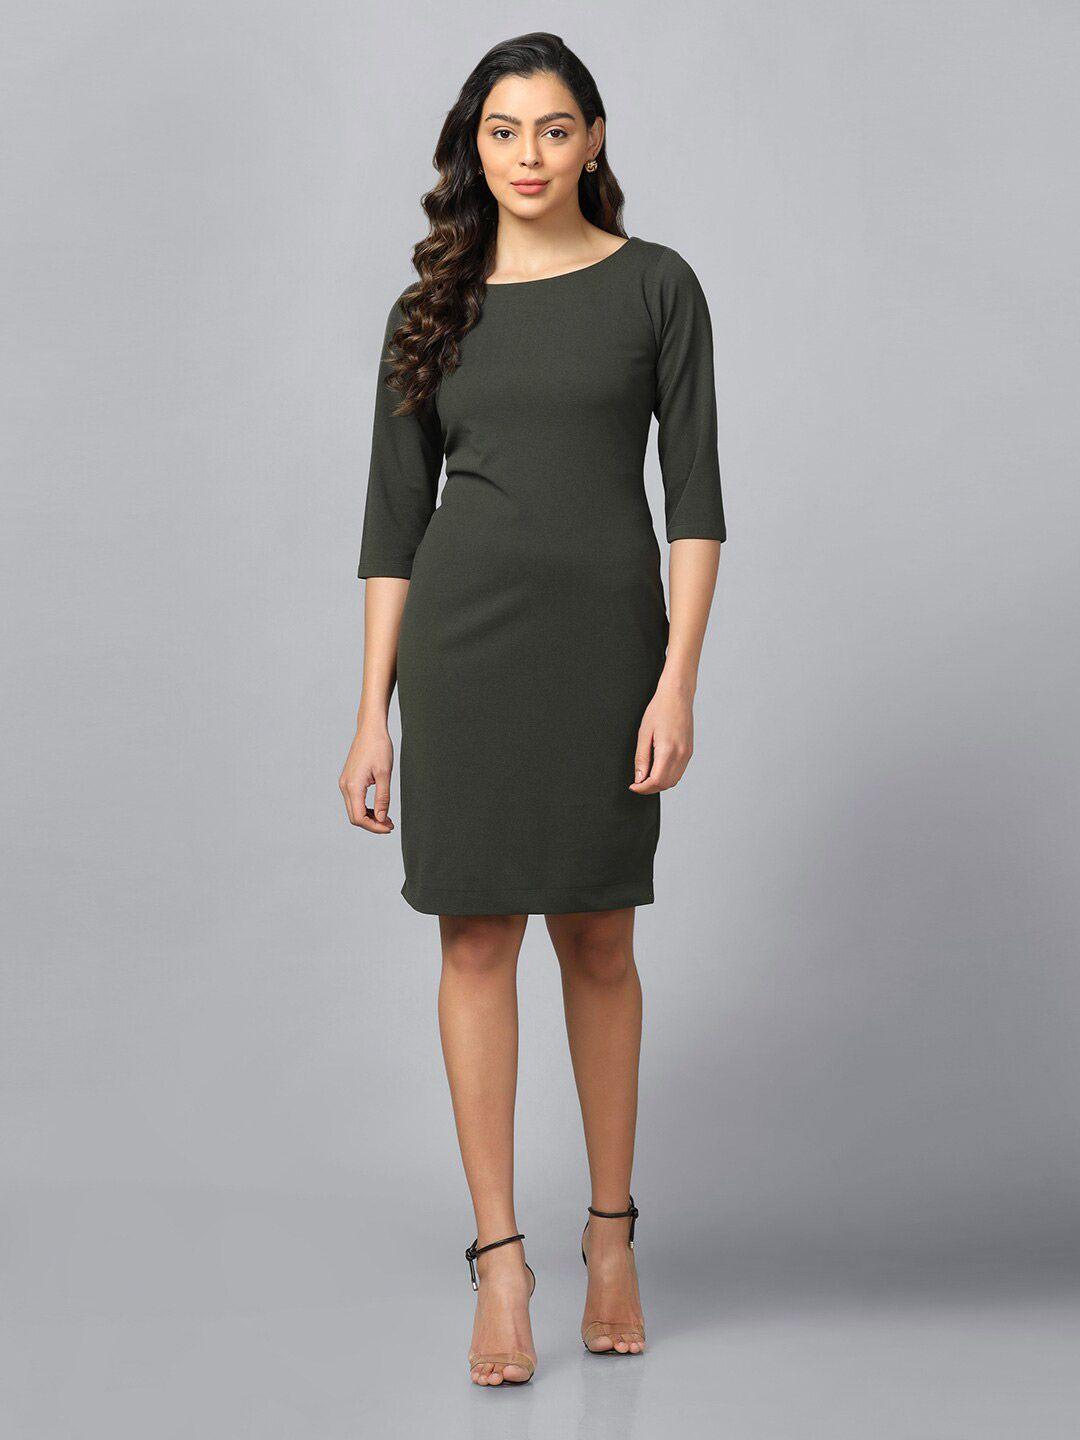 powersutra-boat-neck-three-quarter-sleeves-knitted-sheath-dress